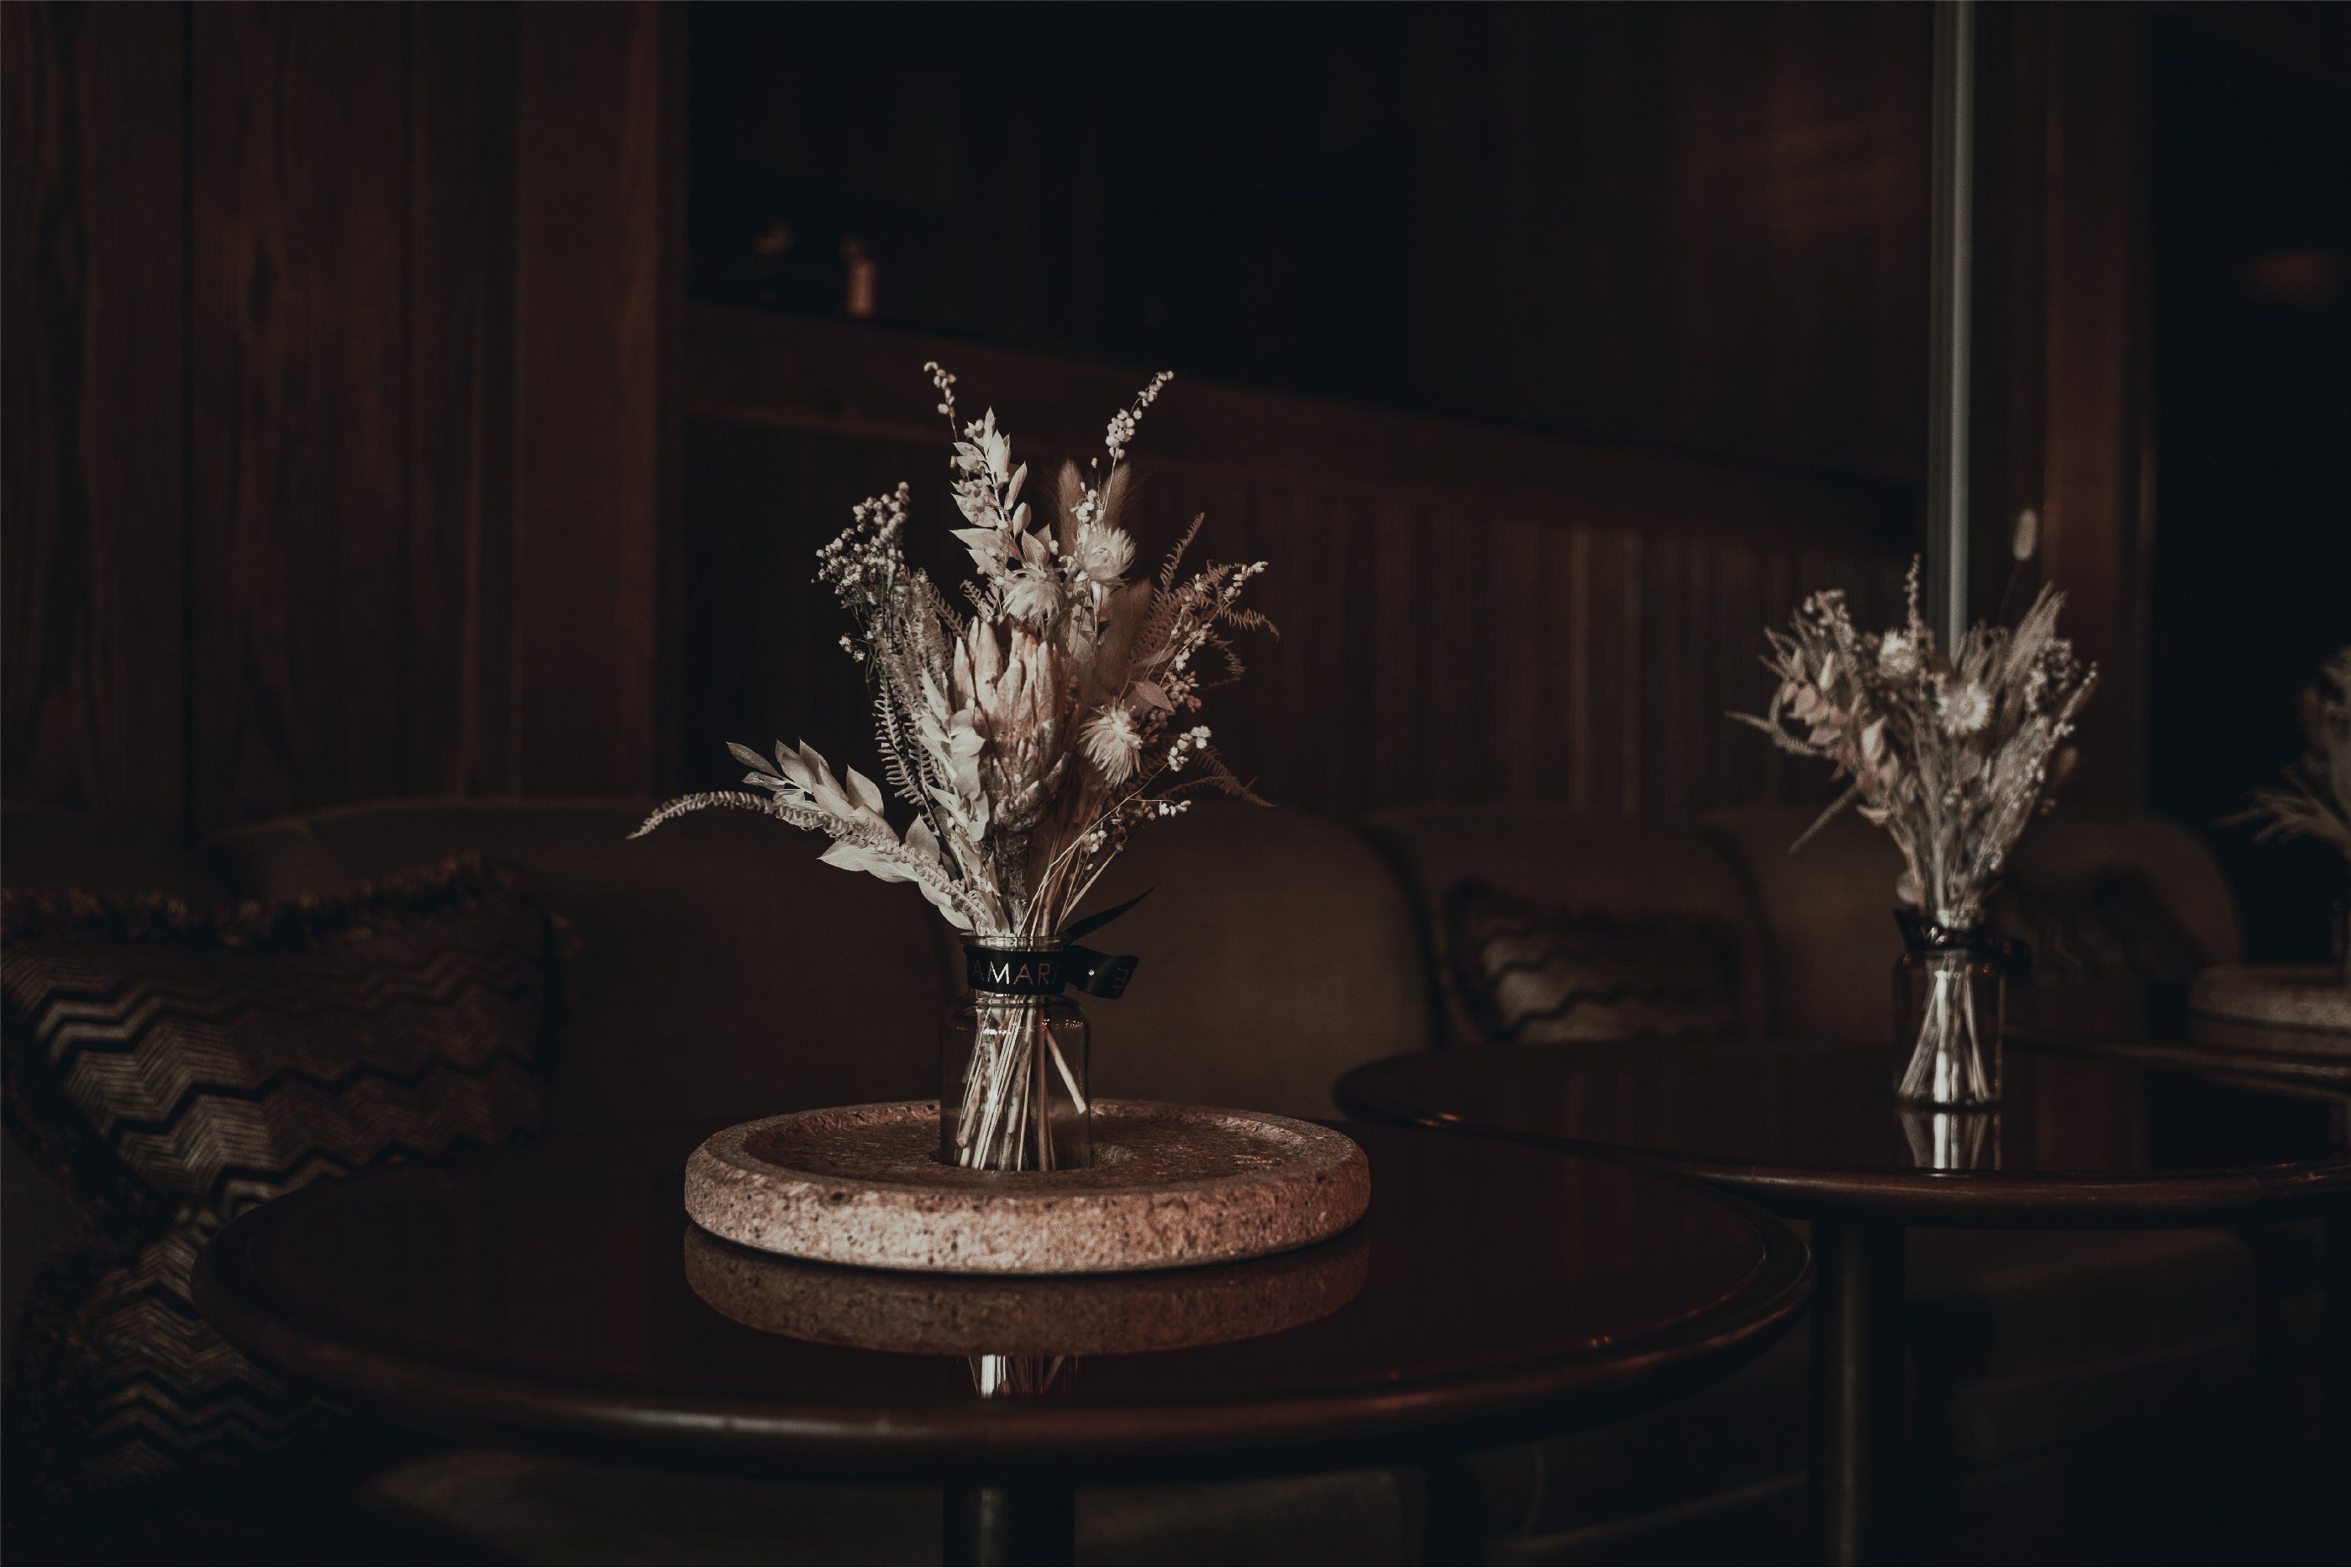 A pair of Amaranté's bespoke floral arrangements for this hotel space gracing a sophisticated venue with delicate dried botanicals in neutral tones that emanate a sense of timeless elegance, set upon circular cork bases on polished wood tables in the dimly lit, intimate ambience of a private intimate space.